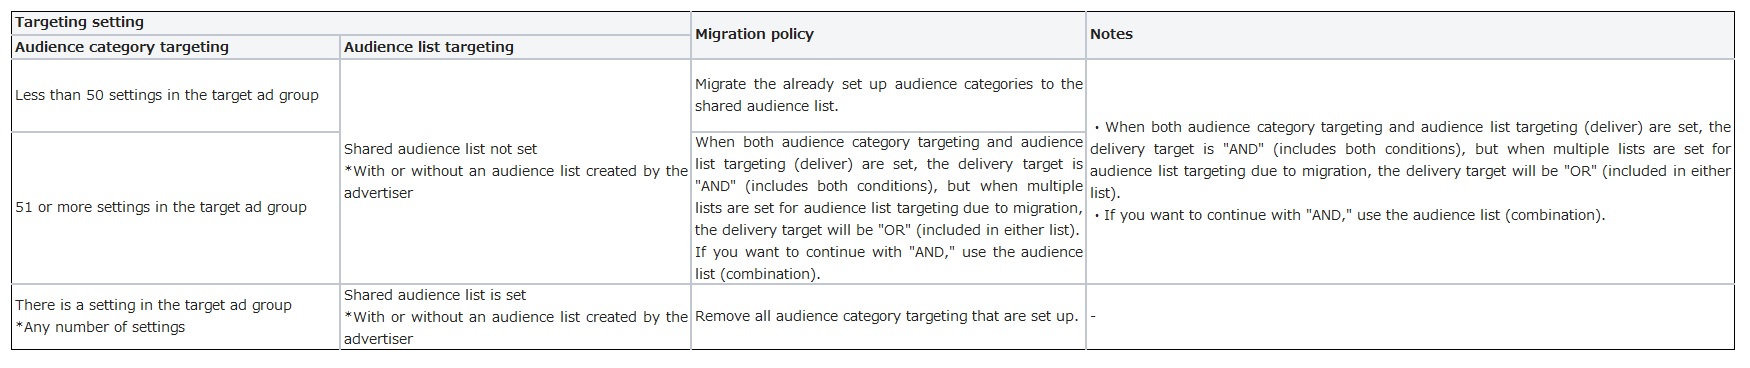 Migration policy